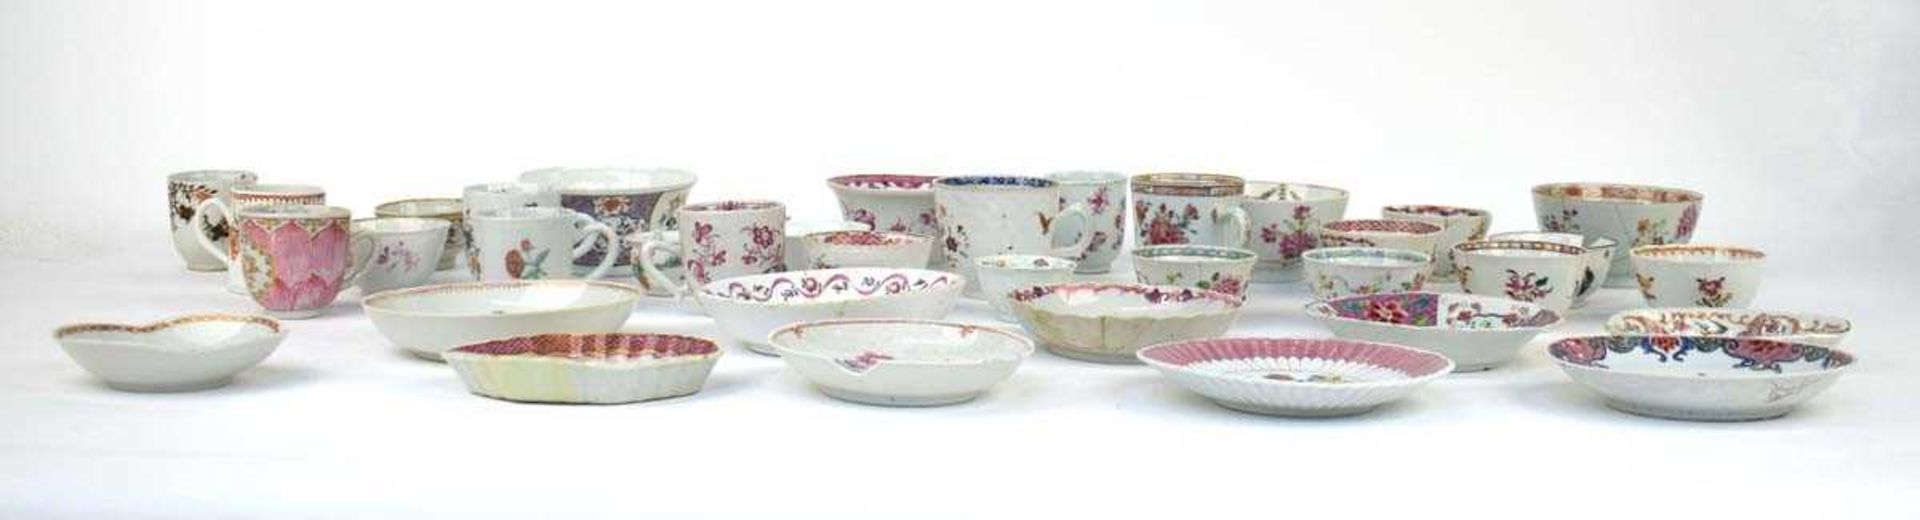 A large quantity of Chinese and famille rose decorated tea bowls, tea cups, saucers and saucer - Image 2 of 6